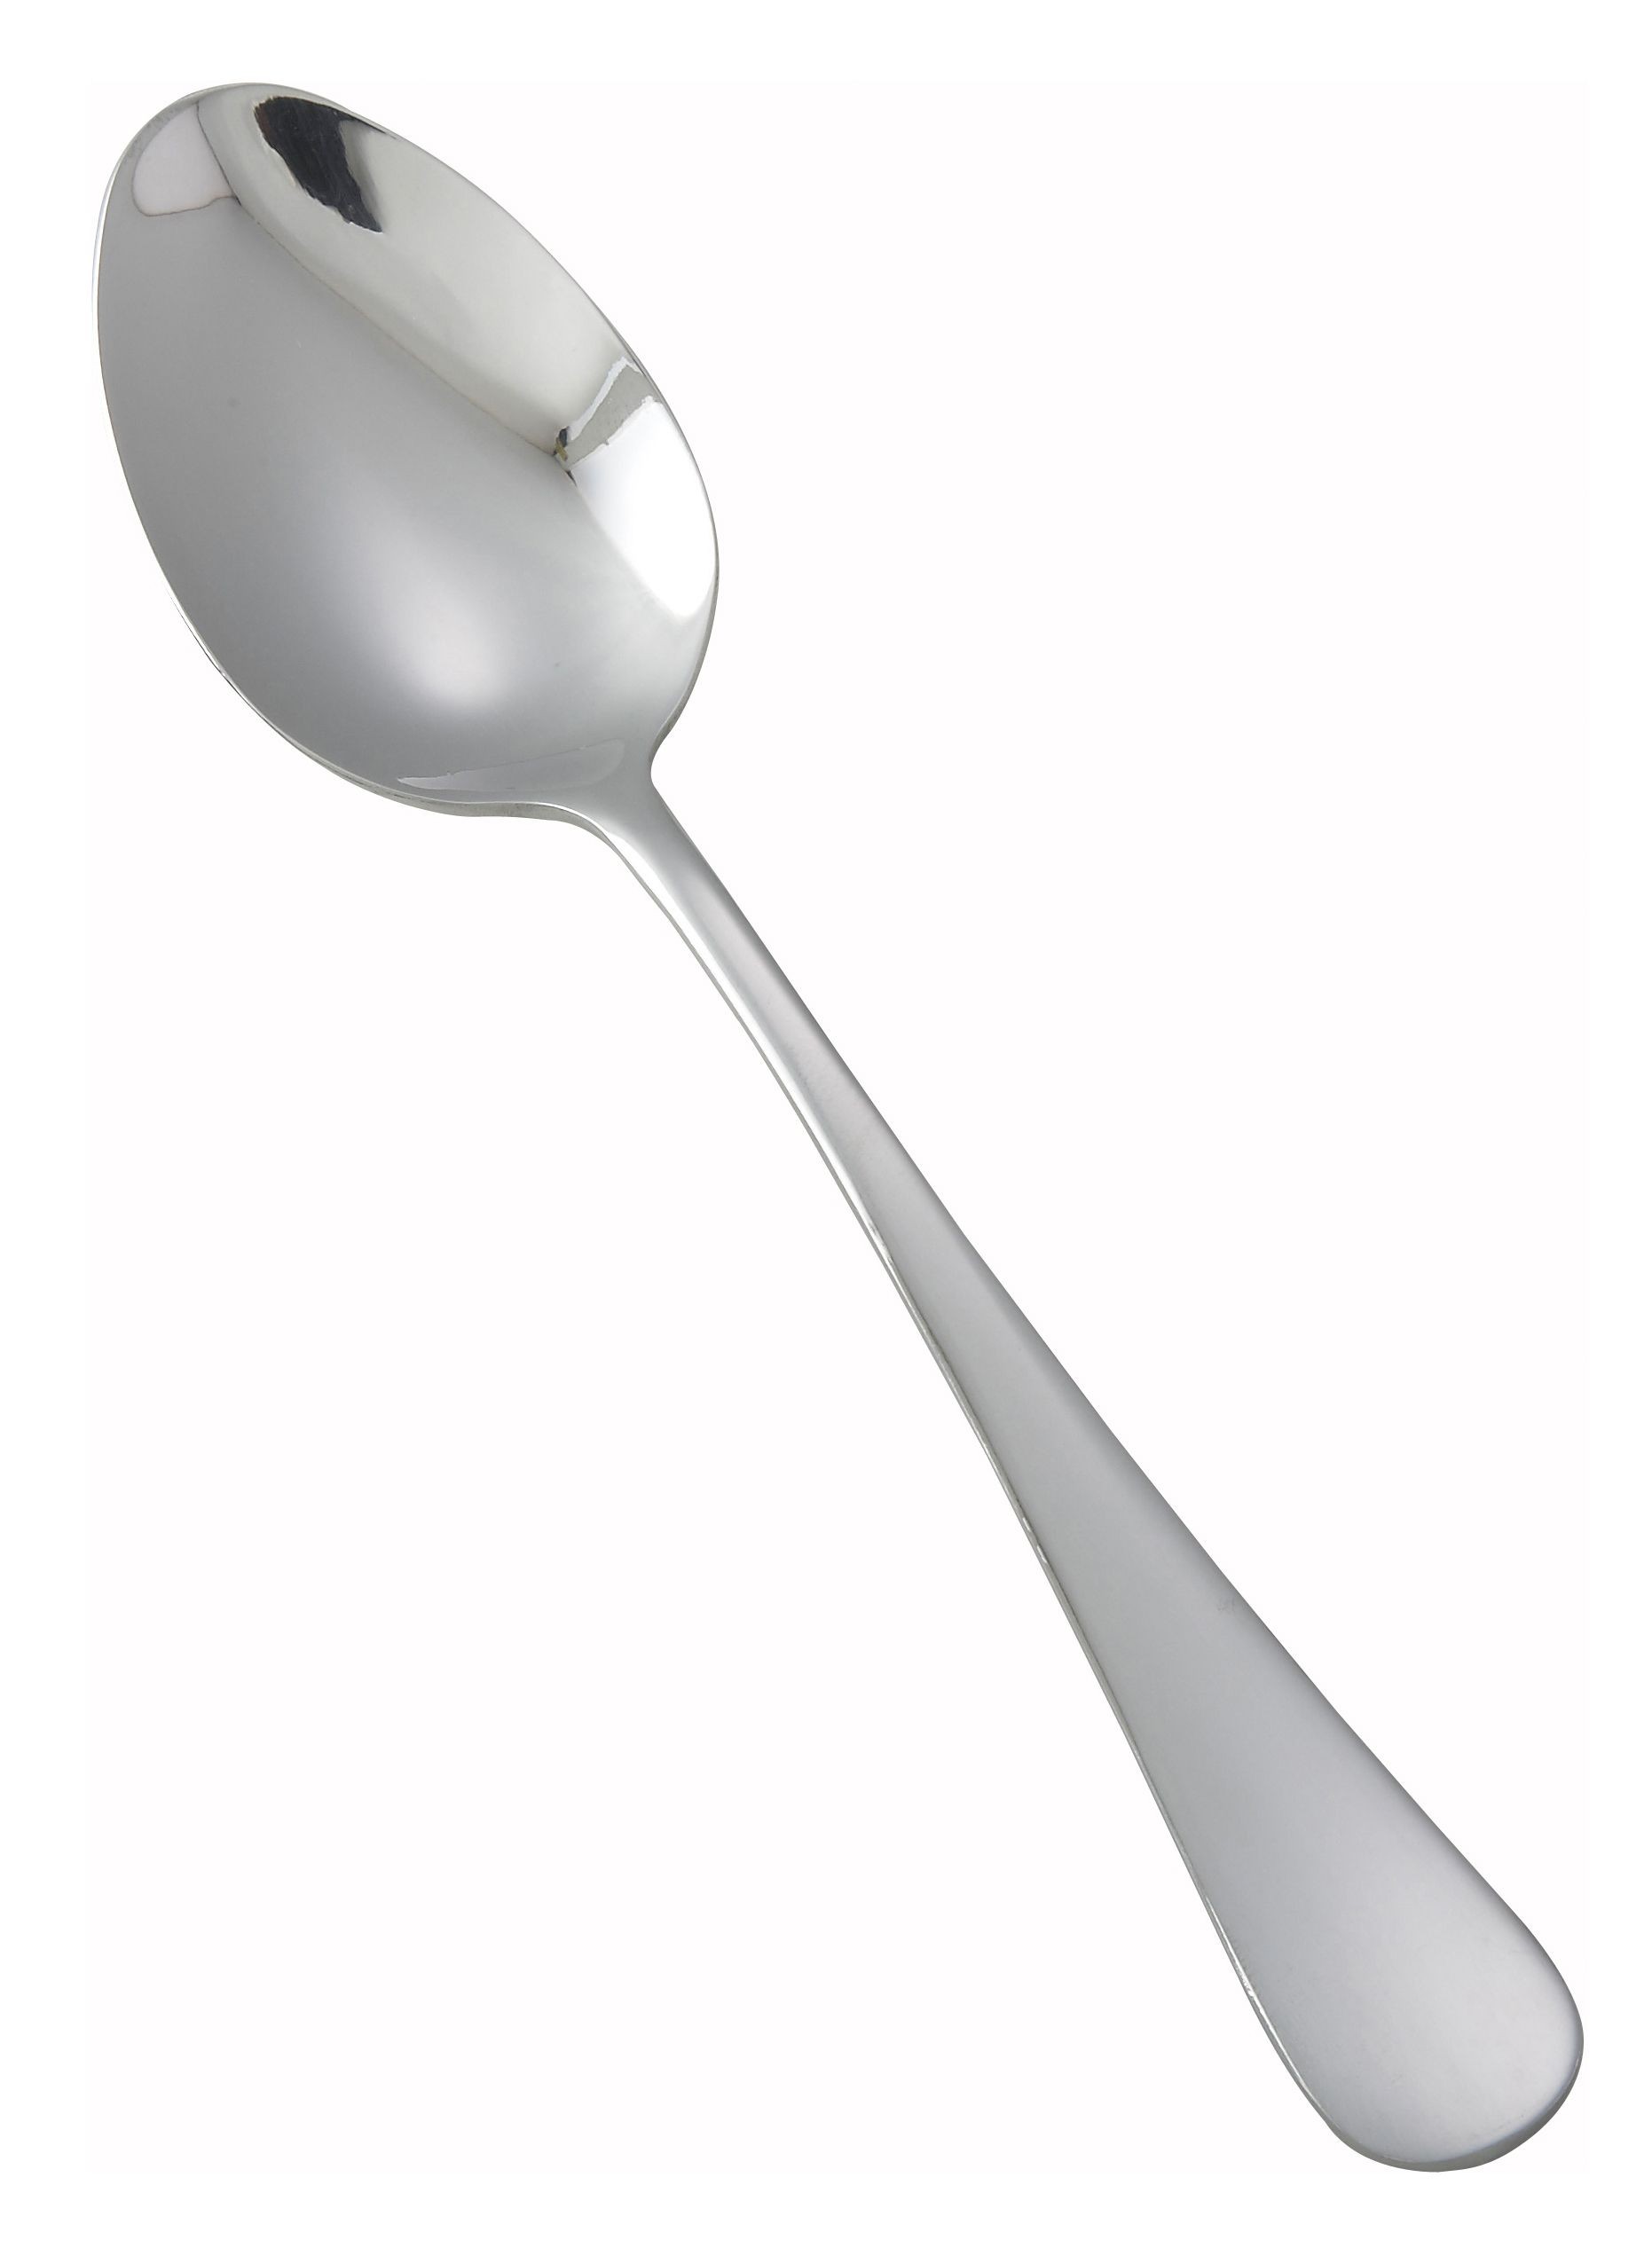 Winco 0026-03 Elite Heavy Weight Mirror Finish Stainless Steel Dinner Spoon (12/Pack)